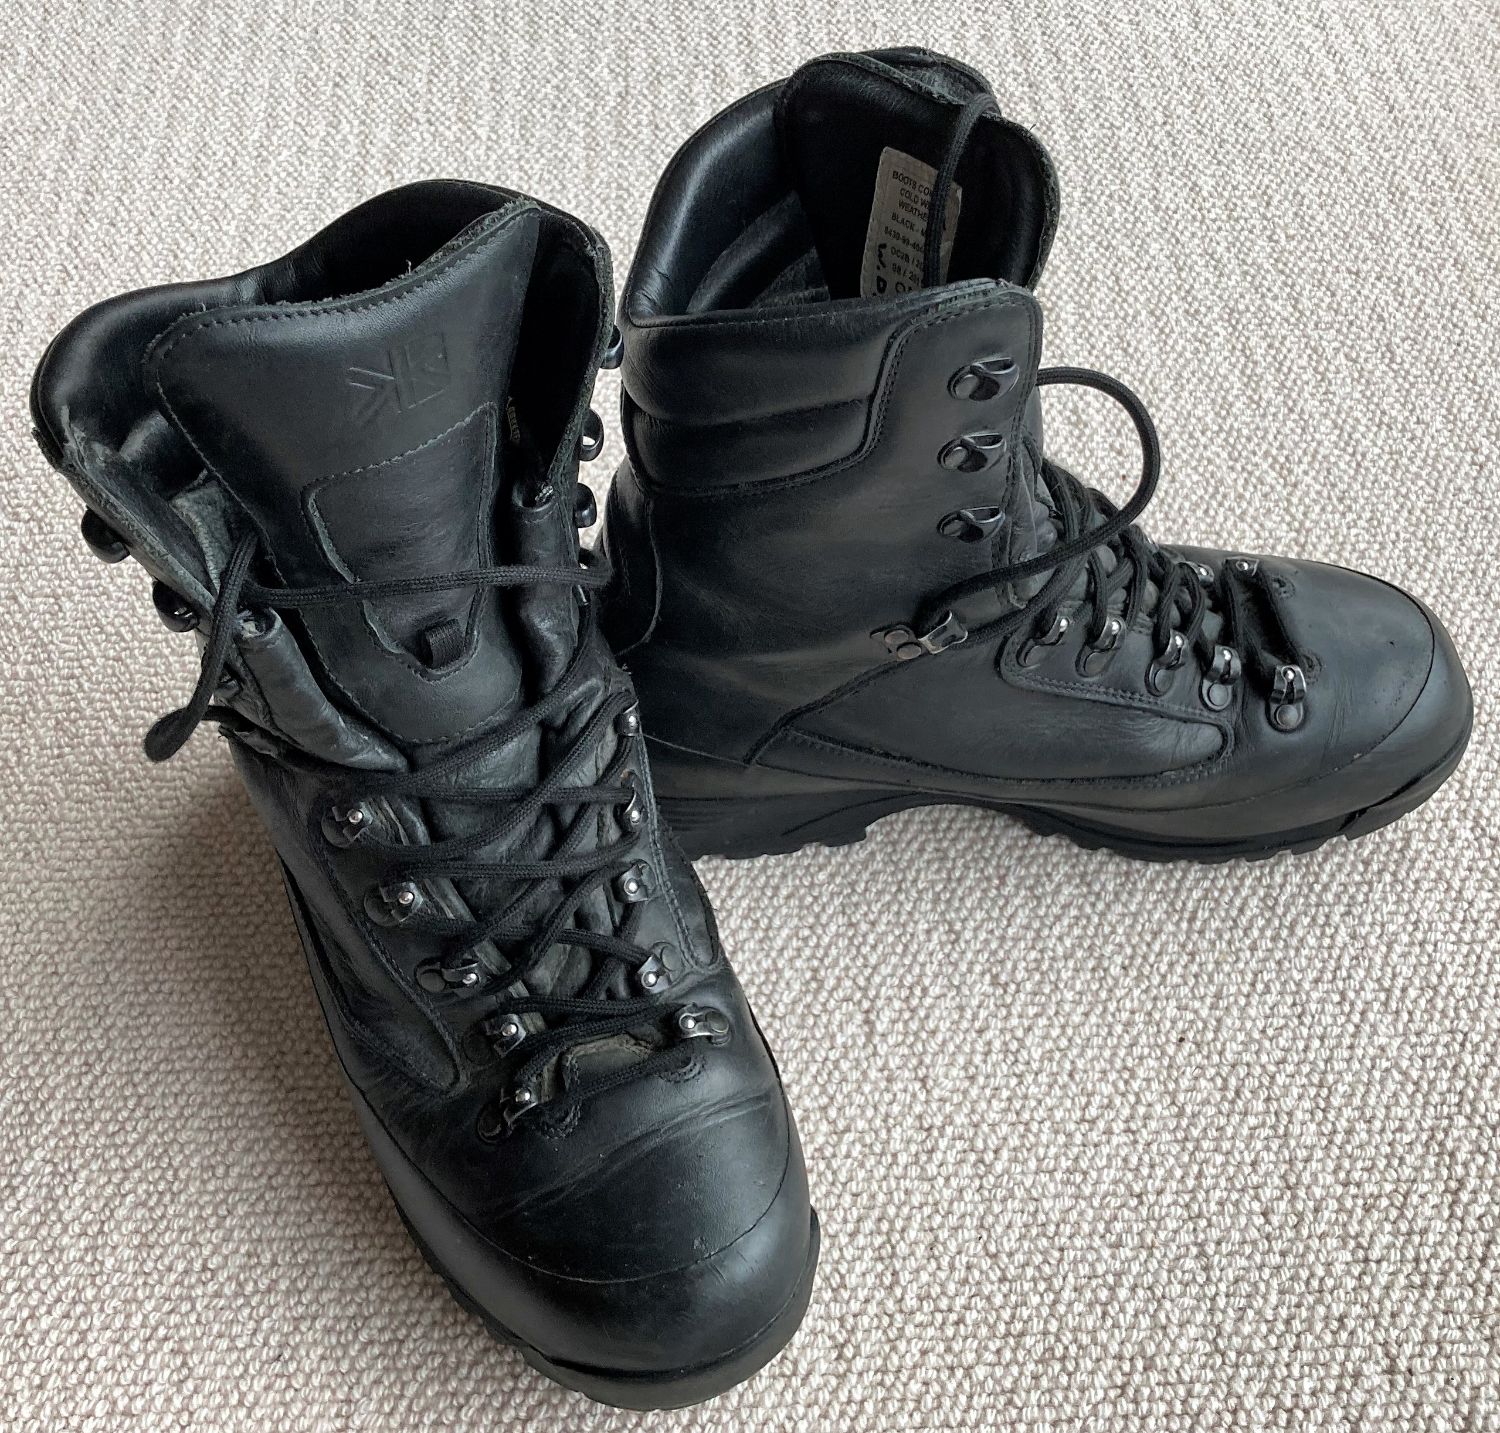 Karrimor SF Boots Size 9 - Gear - Airsoft Forums UK